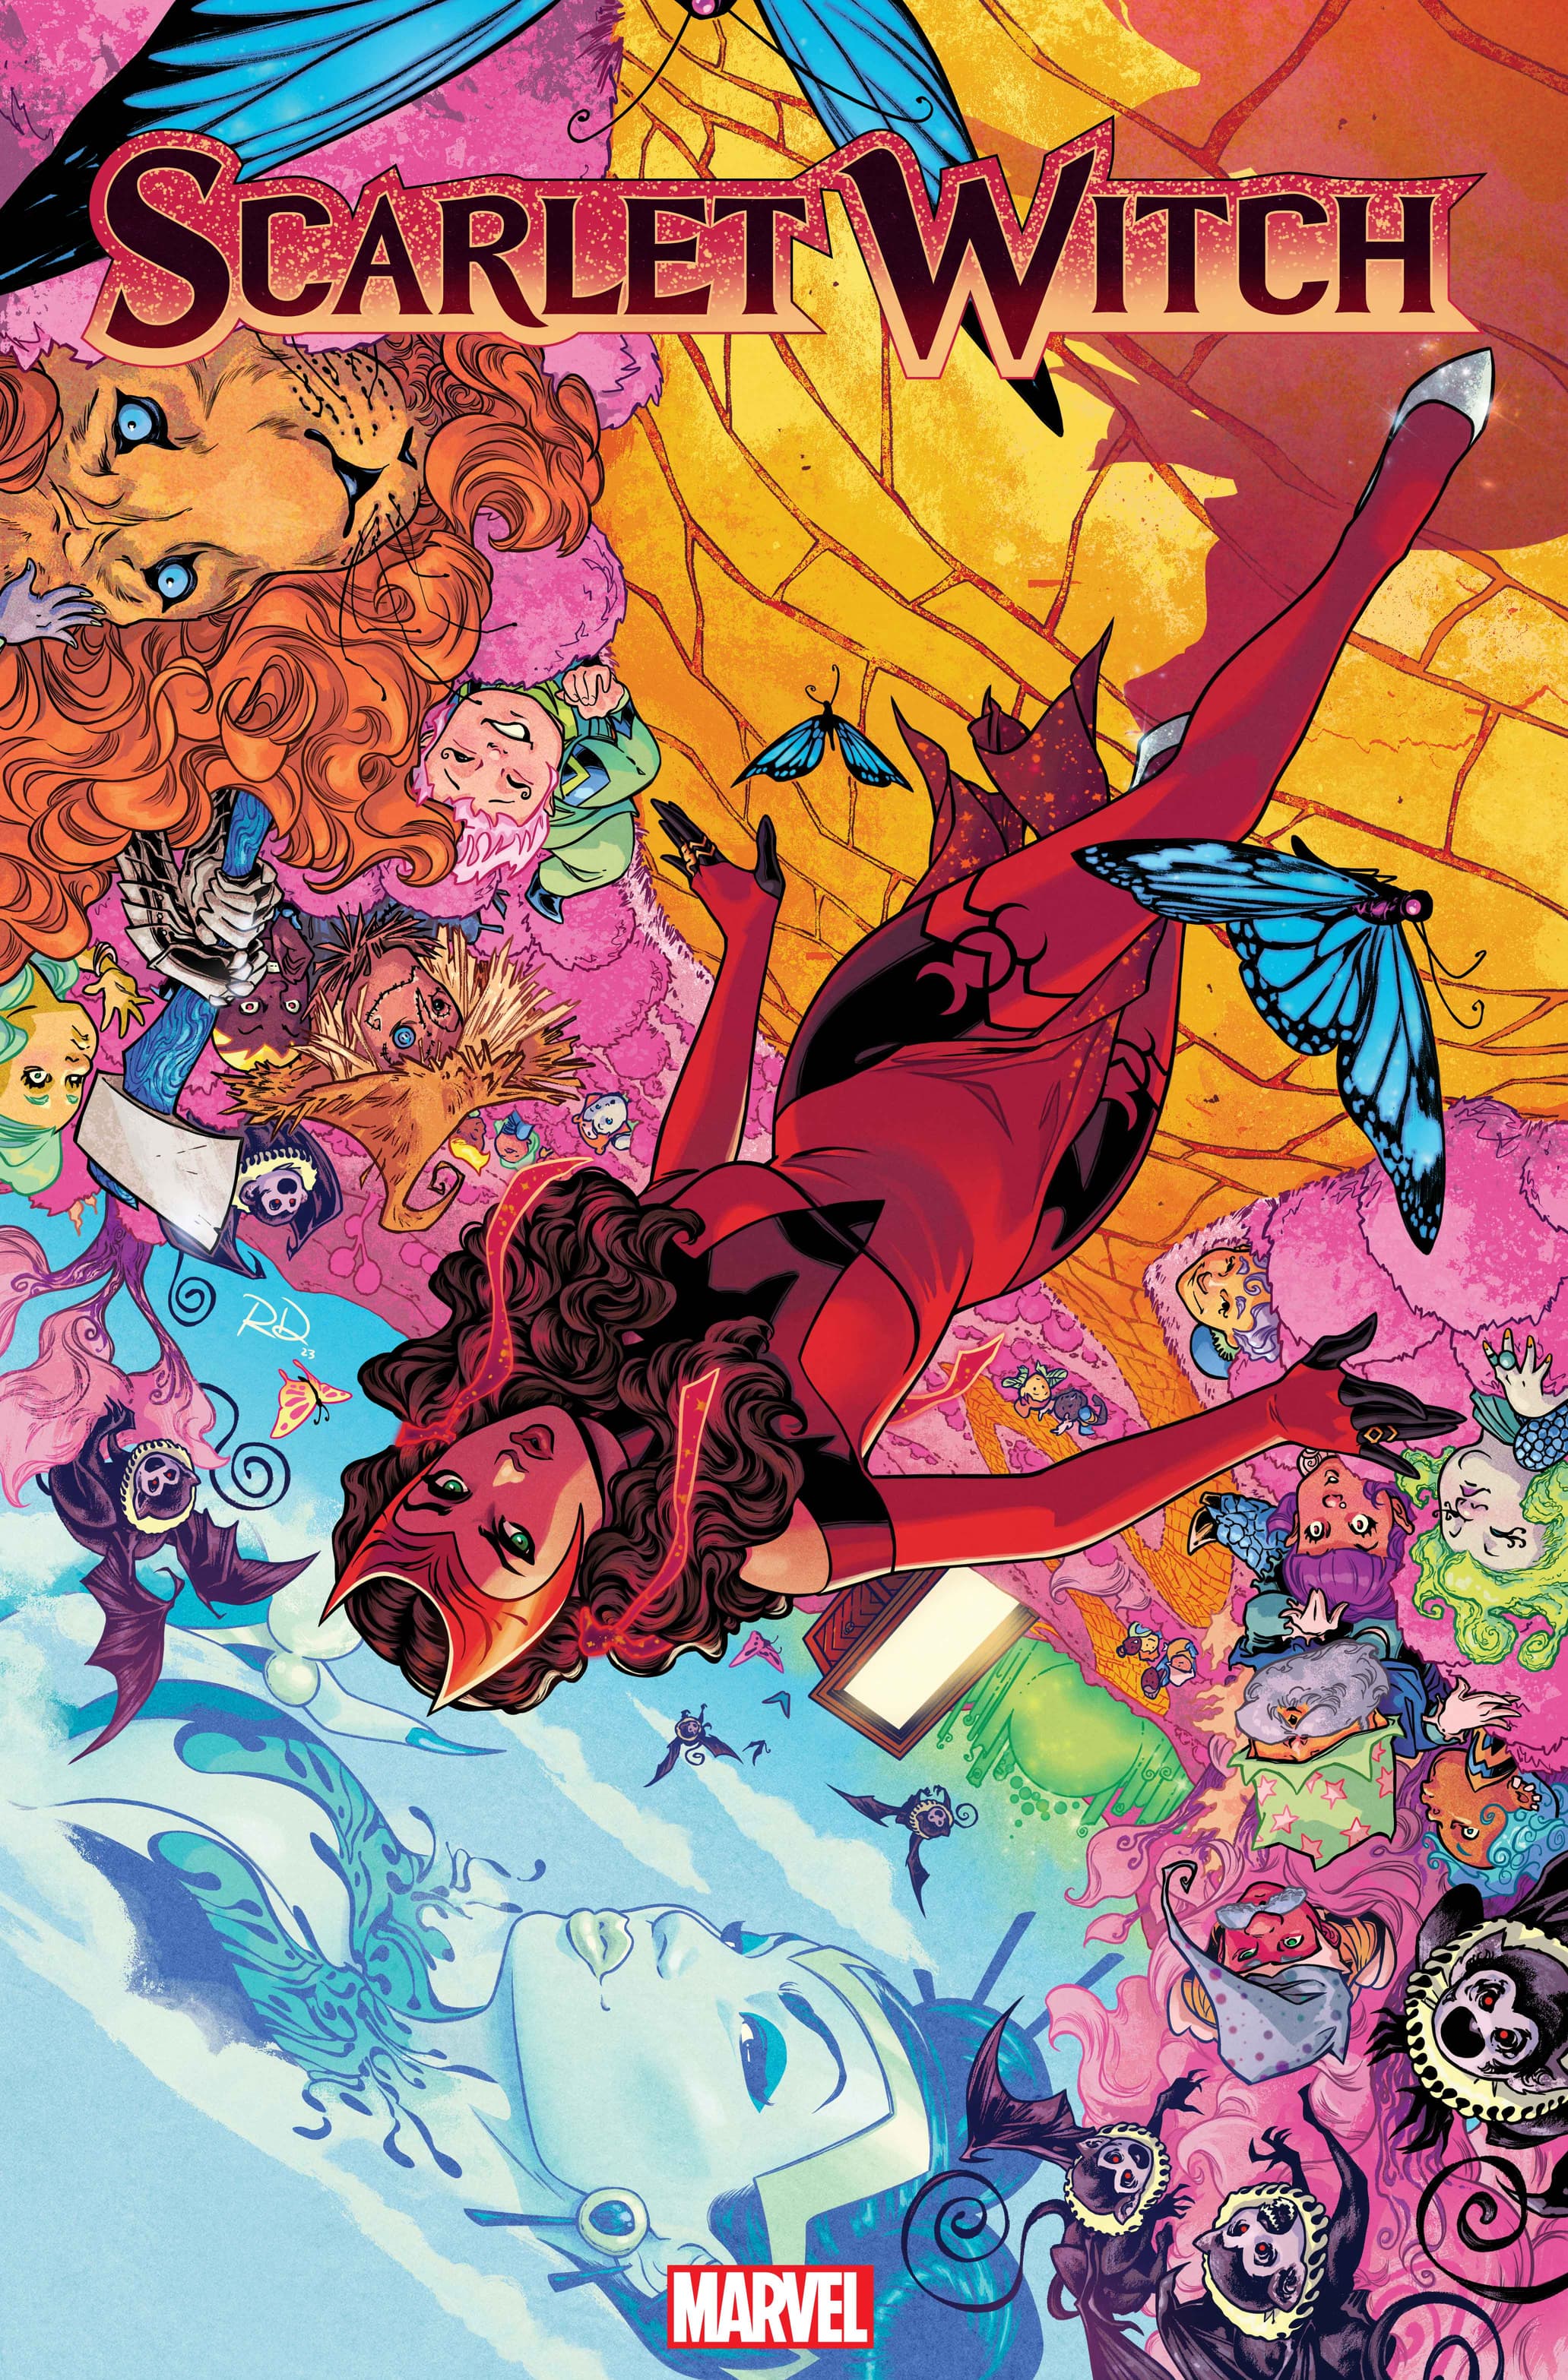 Scarlet Witch #7 cover by Russell Dauterman